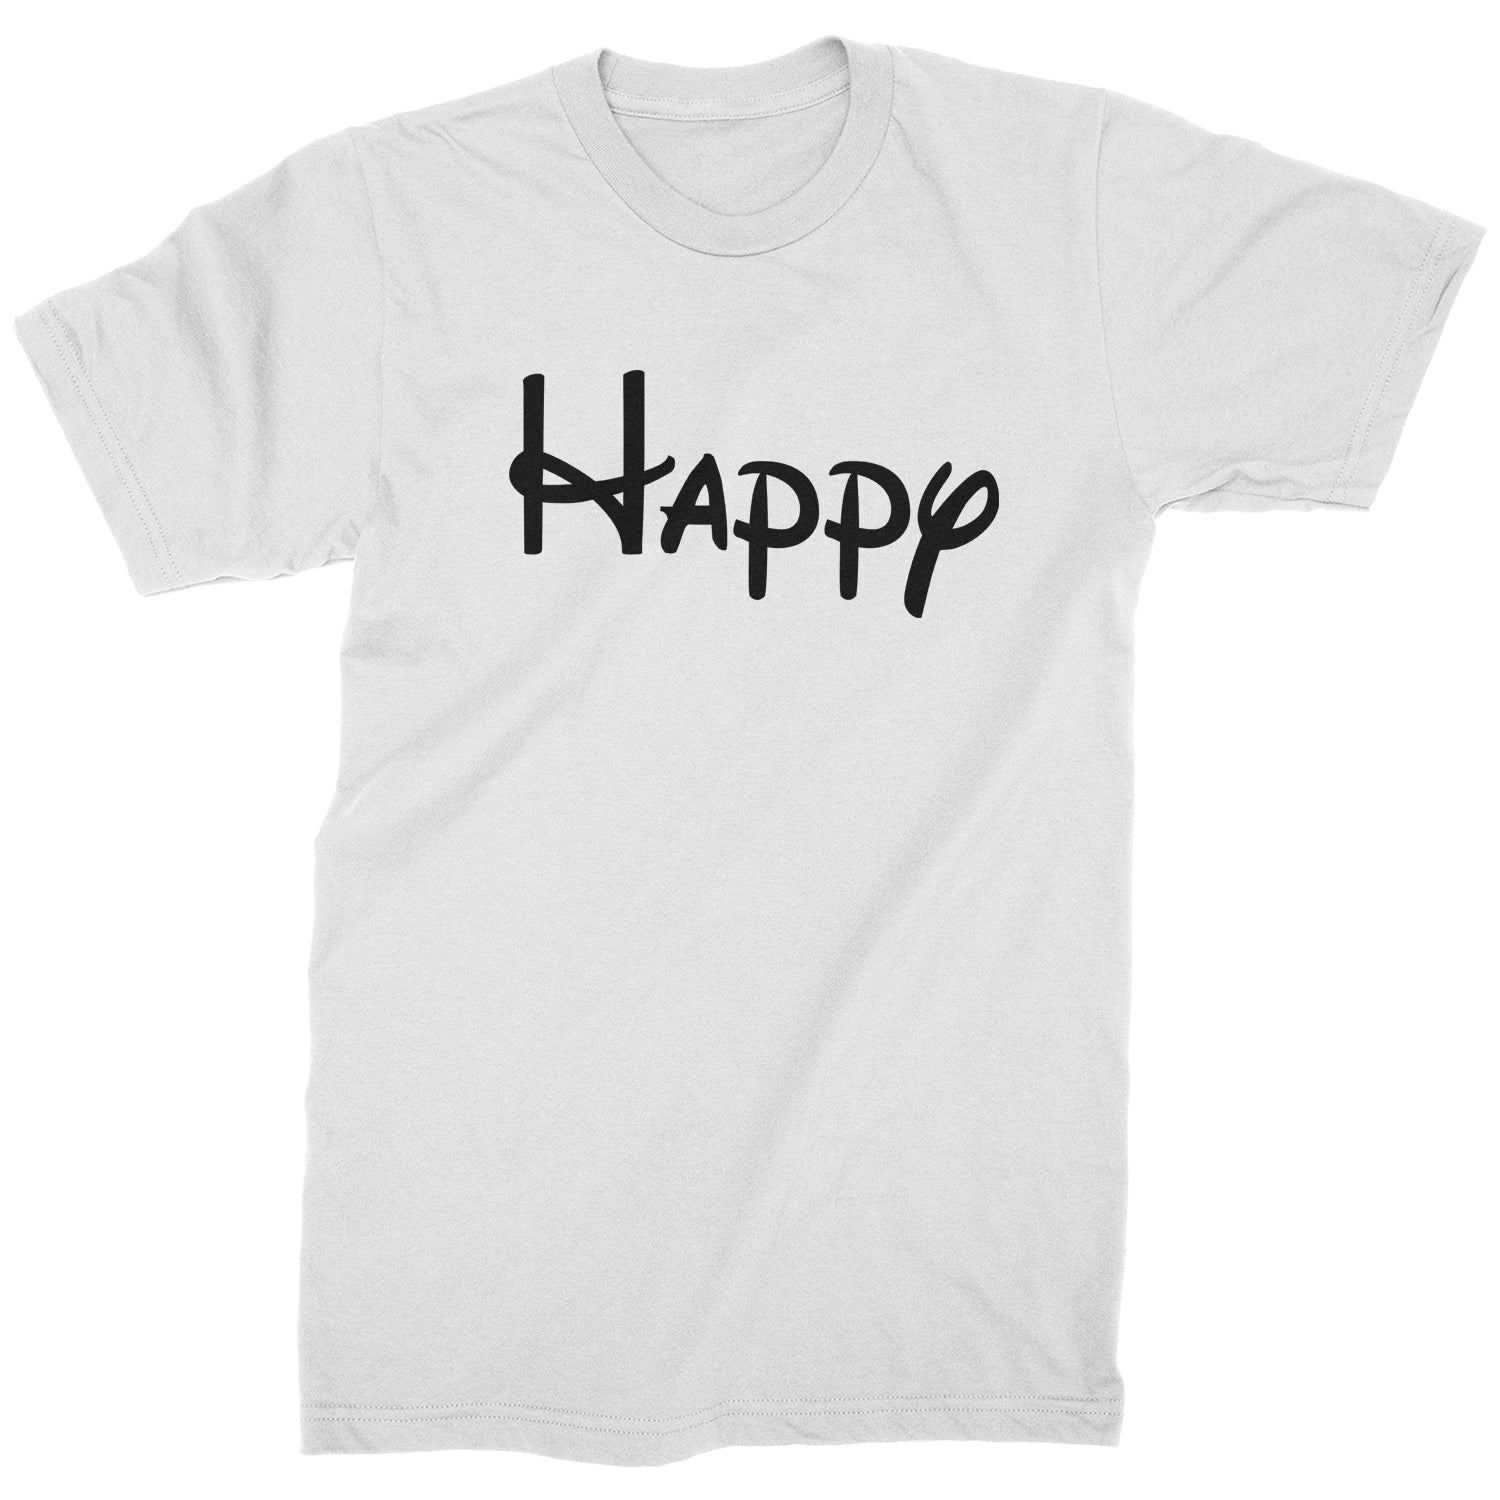 Happy - 7 Dwarfs Costume Mens T-shirt and, costume, dwarfs, group, halloween, matching, seven, snow, the, white by Expression Tees